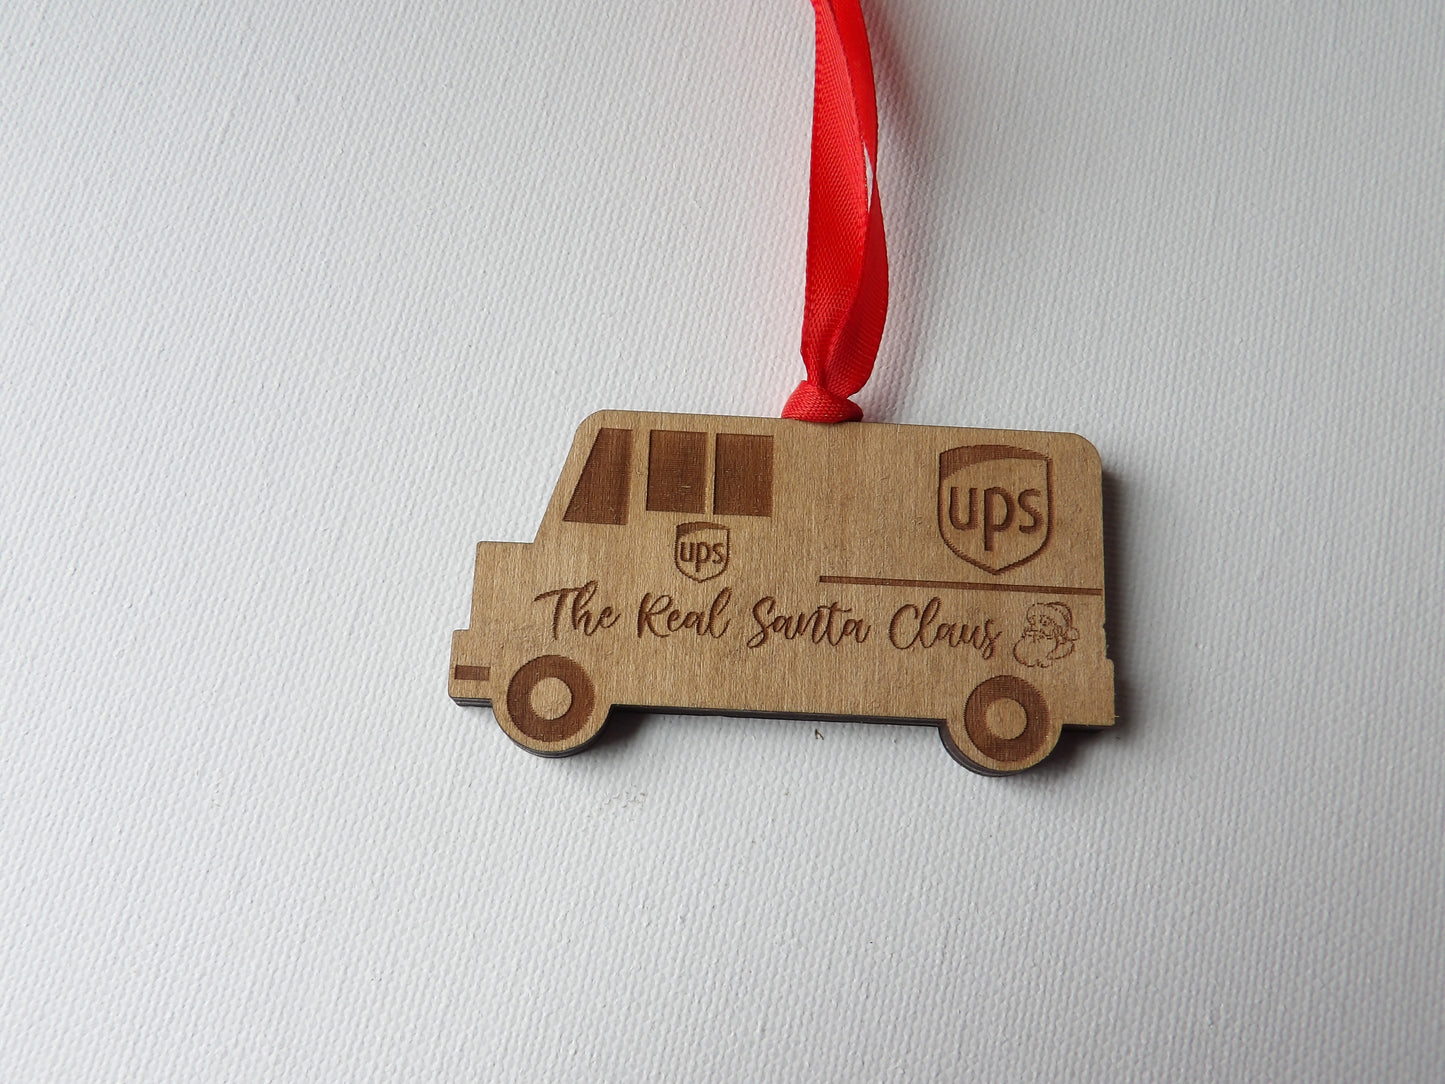 UPS Truck - The Real Santa Claus Wooden Christmas Tree Ornament